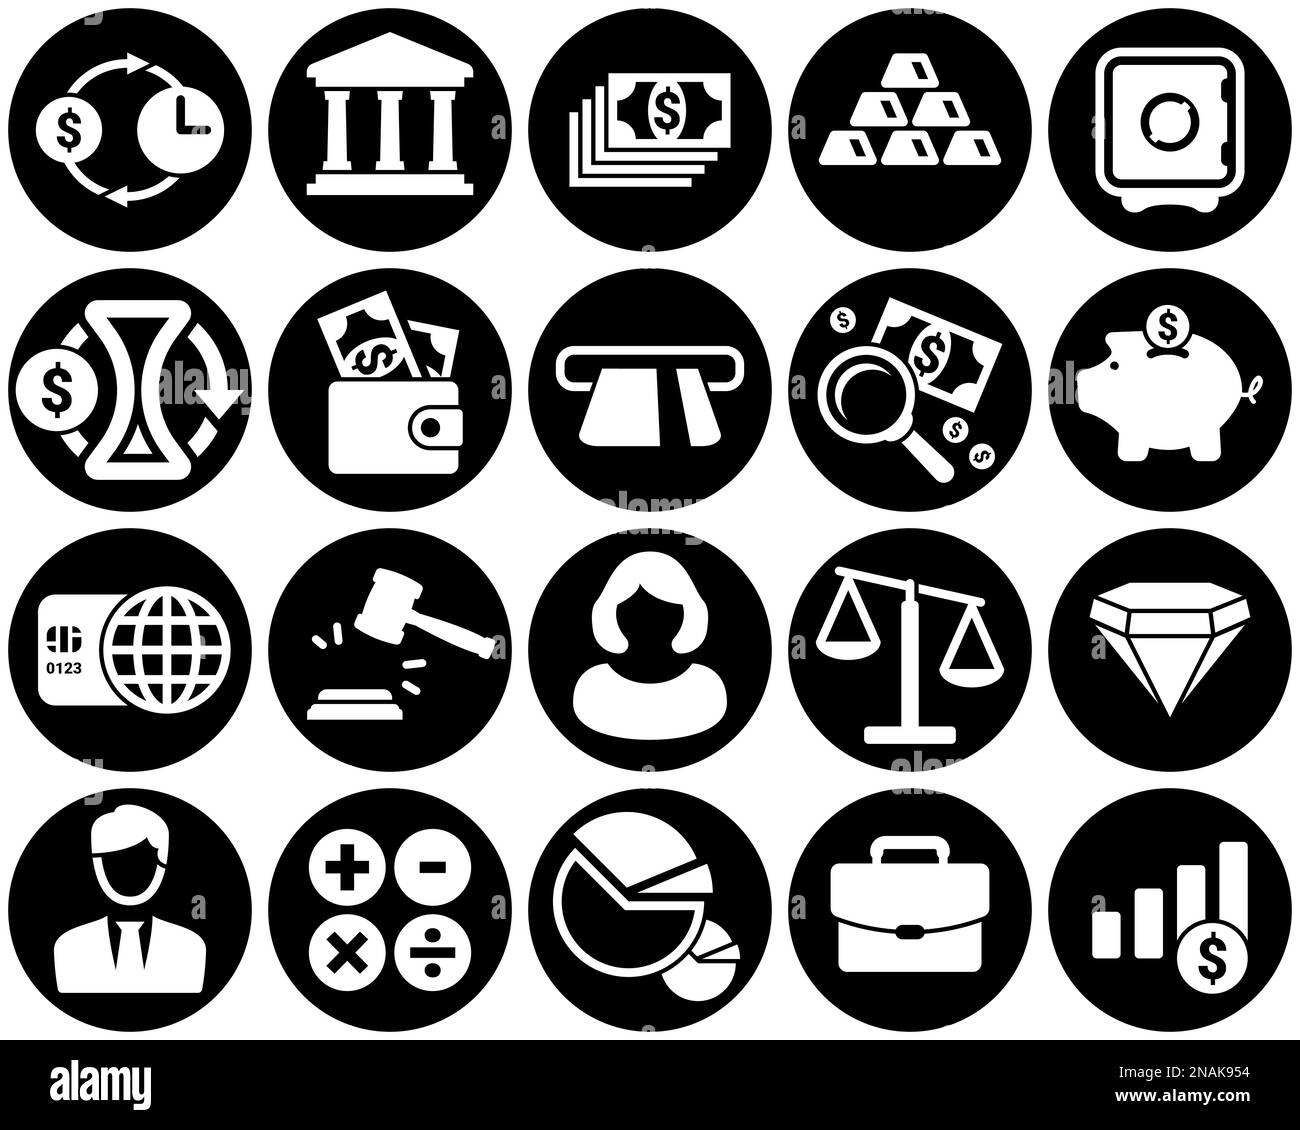 Set of simple icons on a theme Finance, money, bank, vector, design, collection, flat, sign, symbol,element, object, illustration. White background Stock Vector